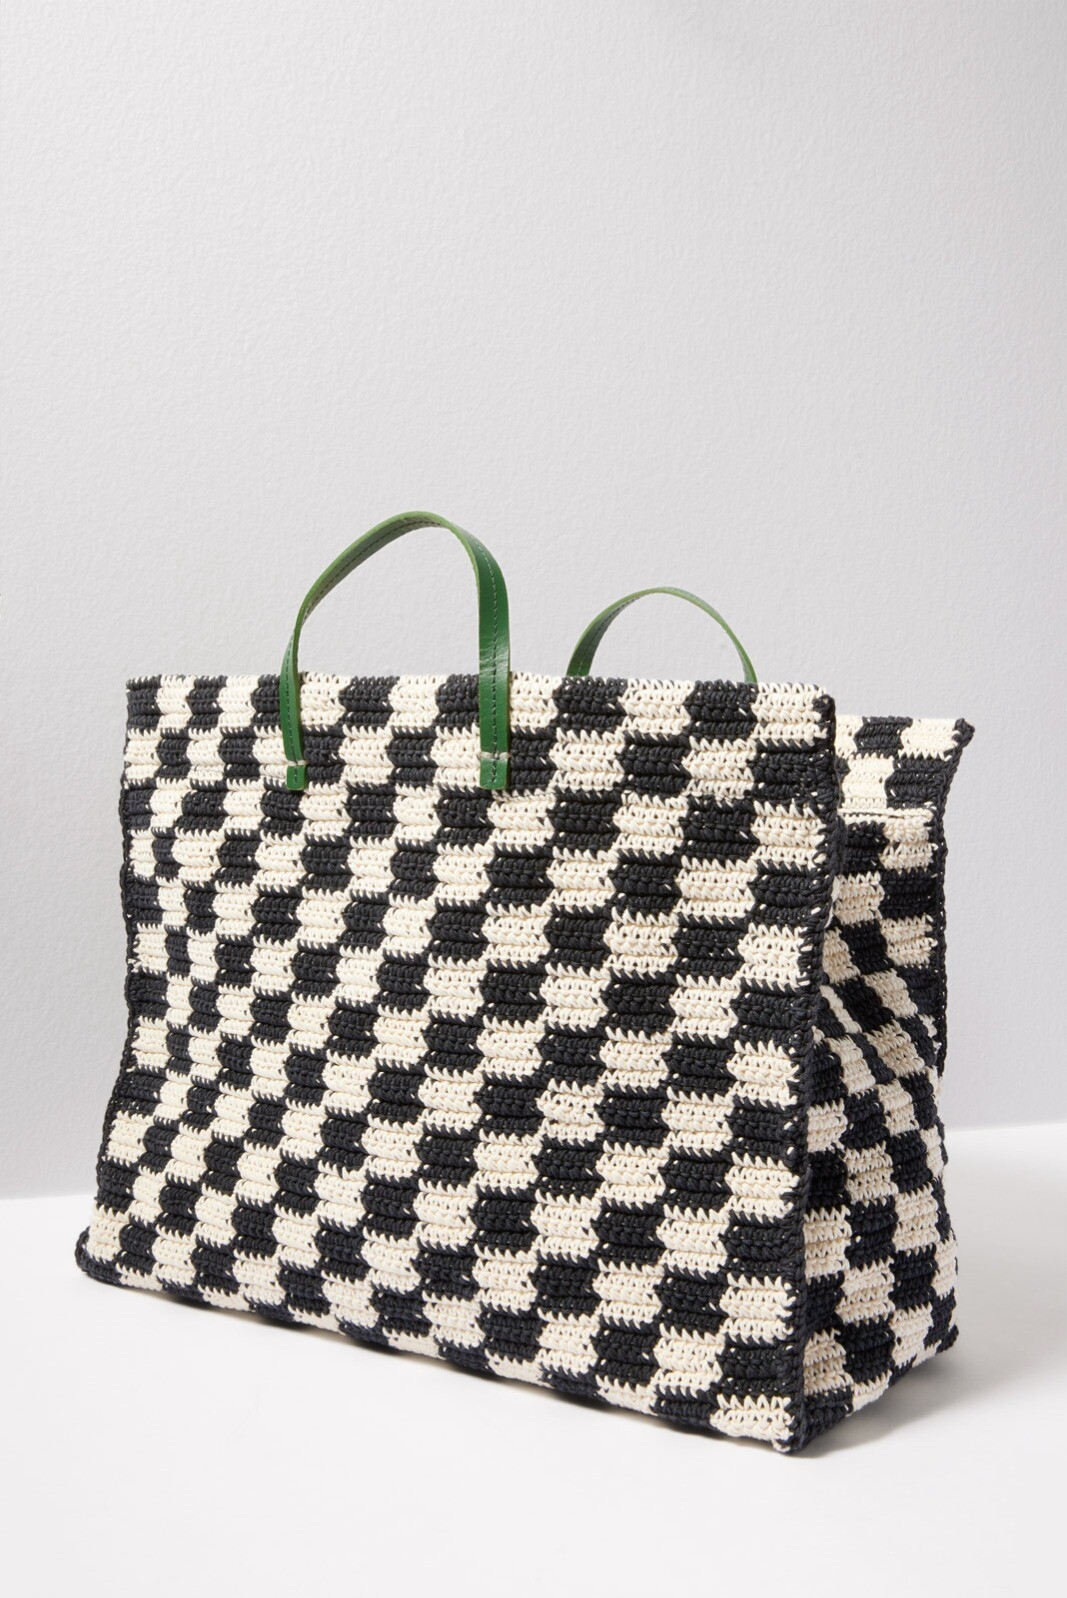 Summer Simple Tote in Multi Condessa Plaid by Clare V. exclusive at – The  Shoe Hive